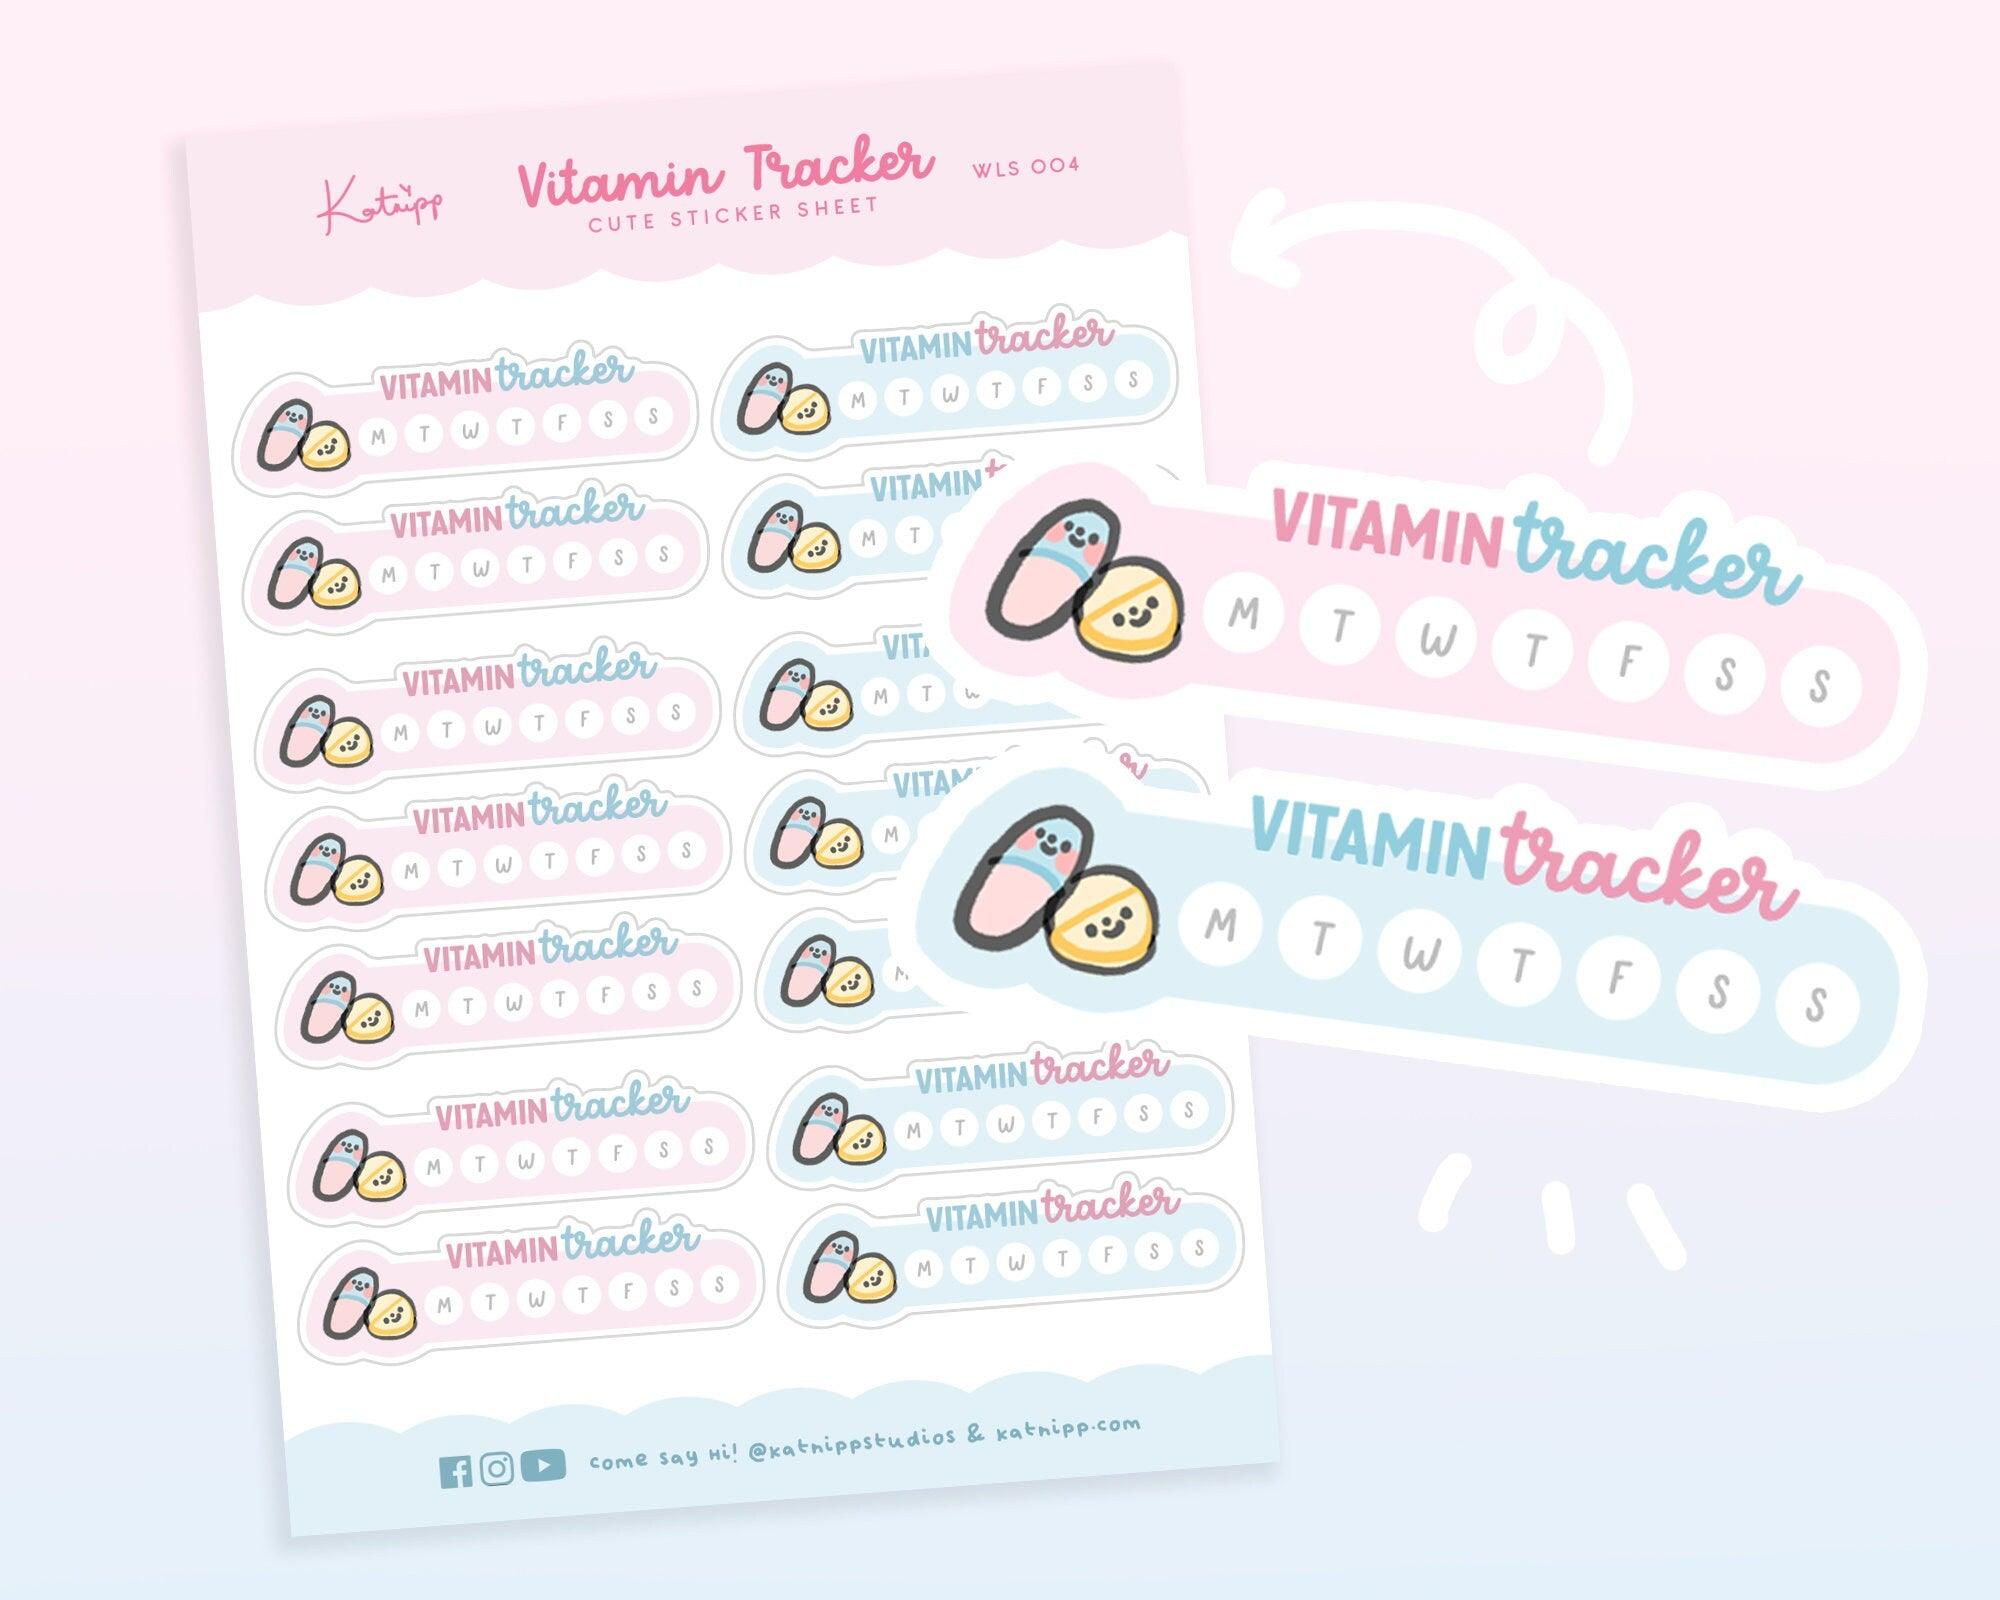 Adorable pastel planner stickers for tracking vitamin doses like D and B12. Hand-illustrated for charm and organisation, secondary